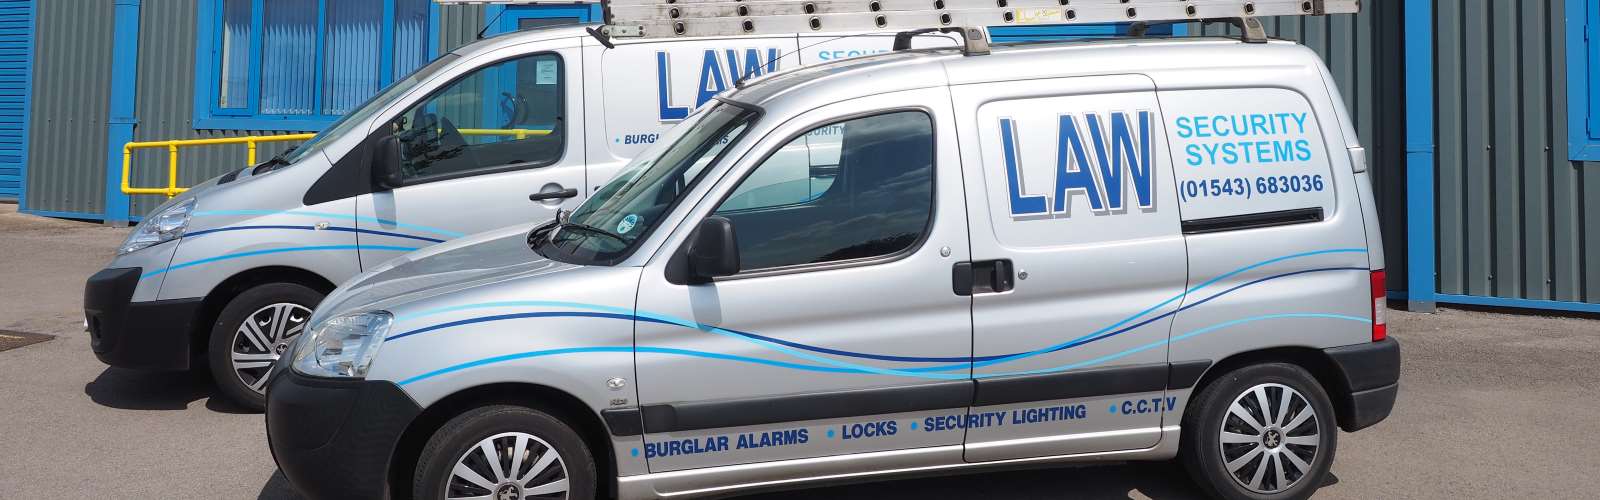 Law Security Systems Ltd